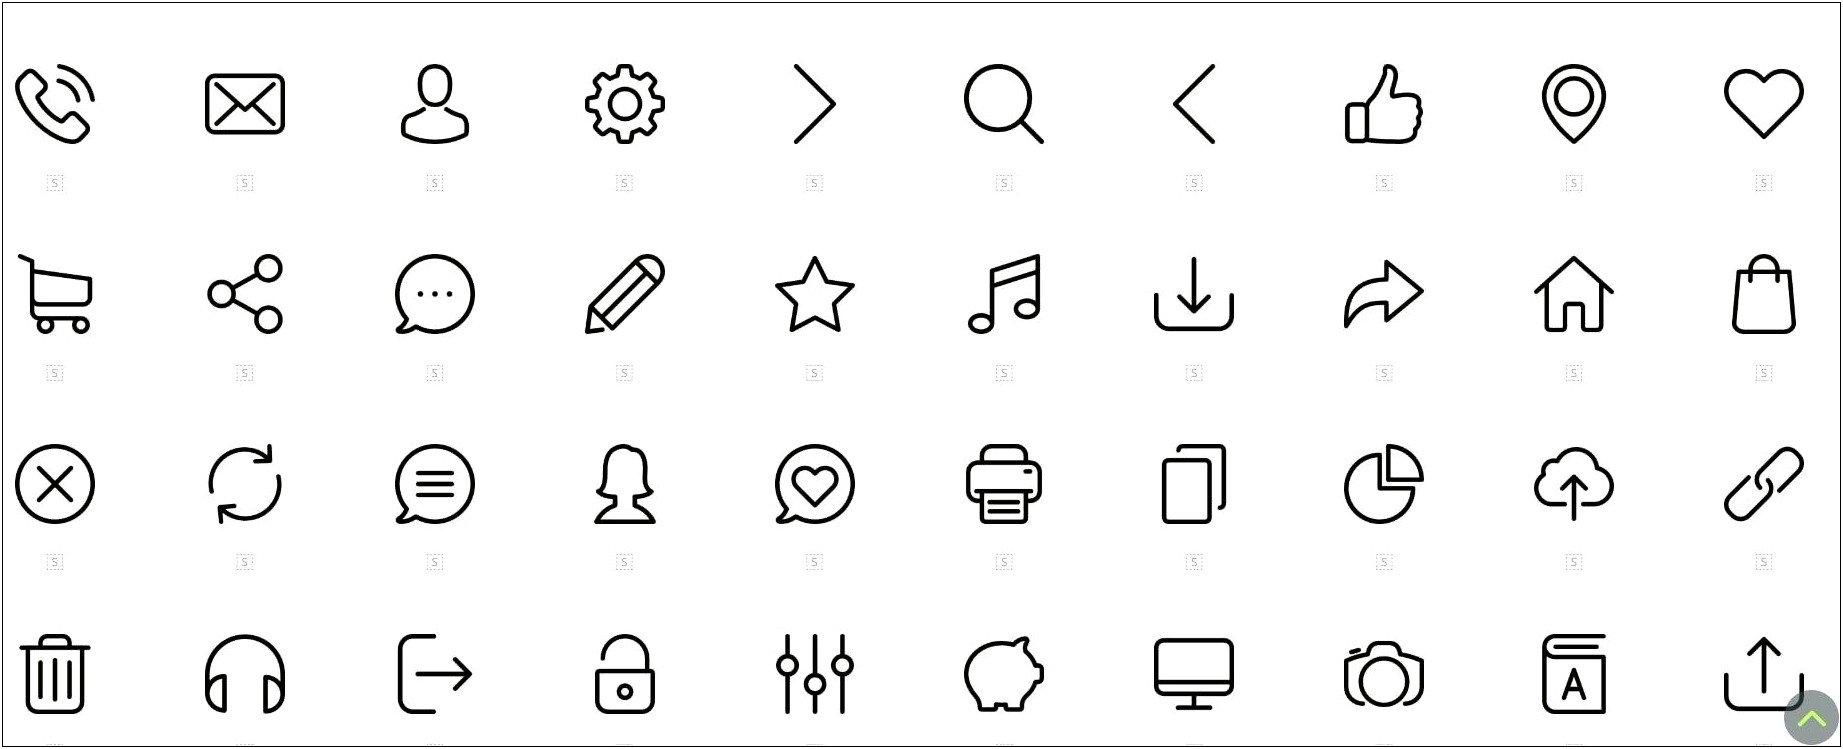 Free Png Icons For Resumes 2018